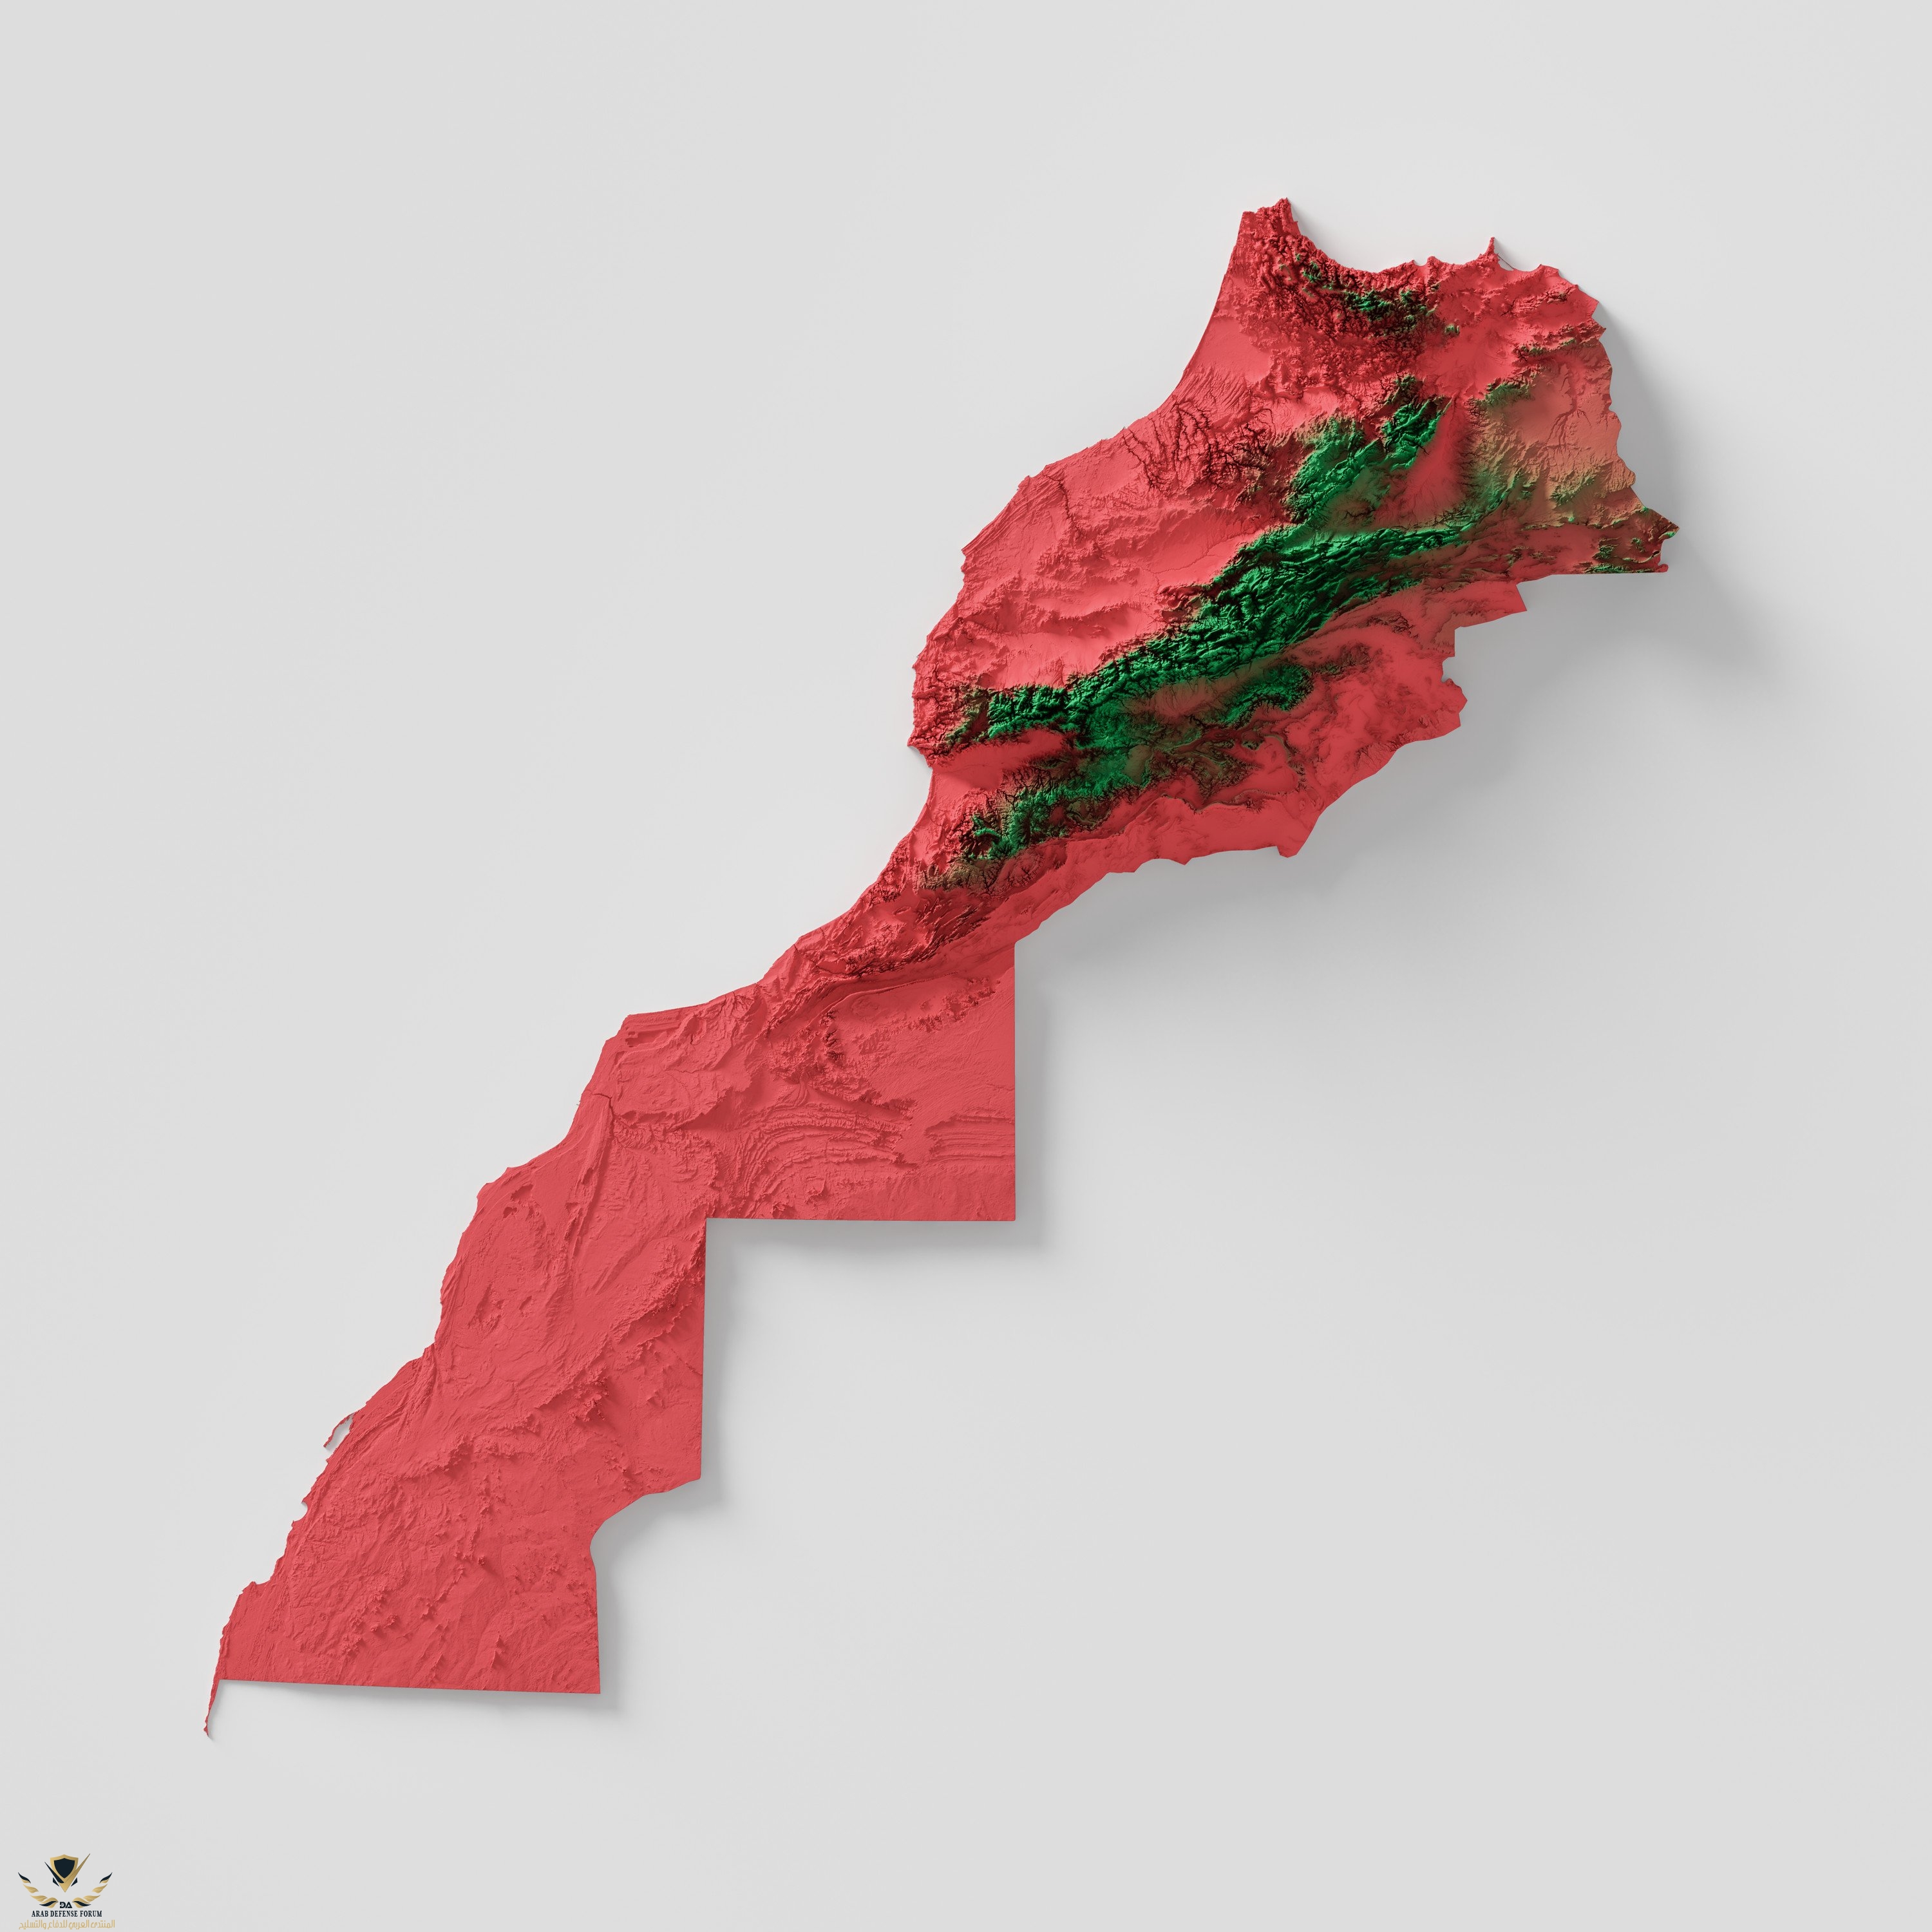 Morocco_Relief_Flag_processed_3000.jpg